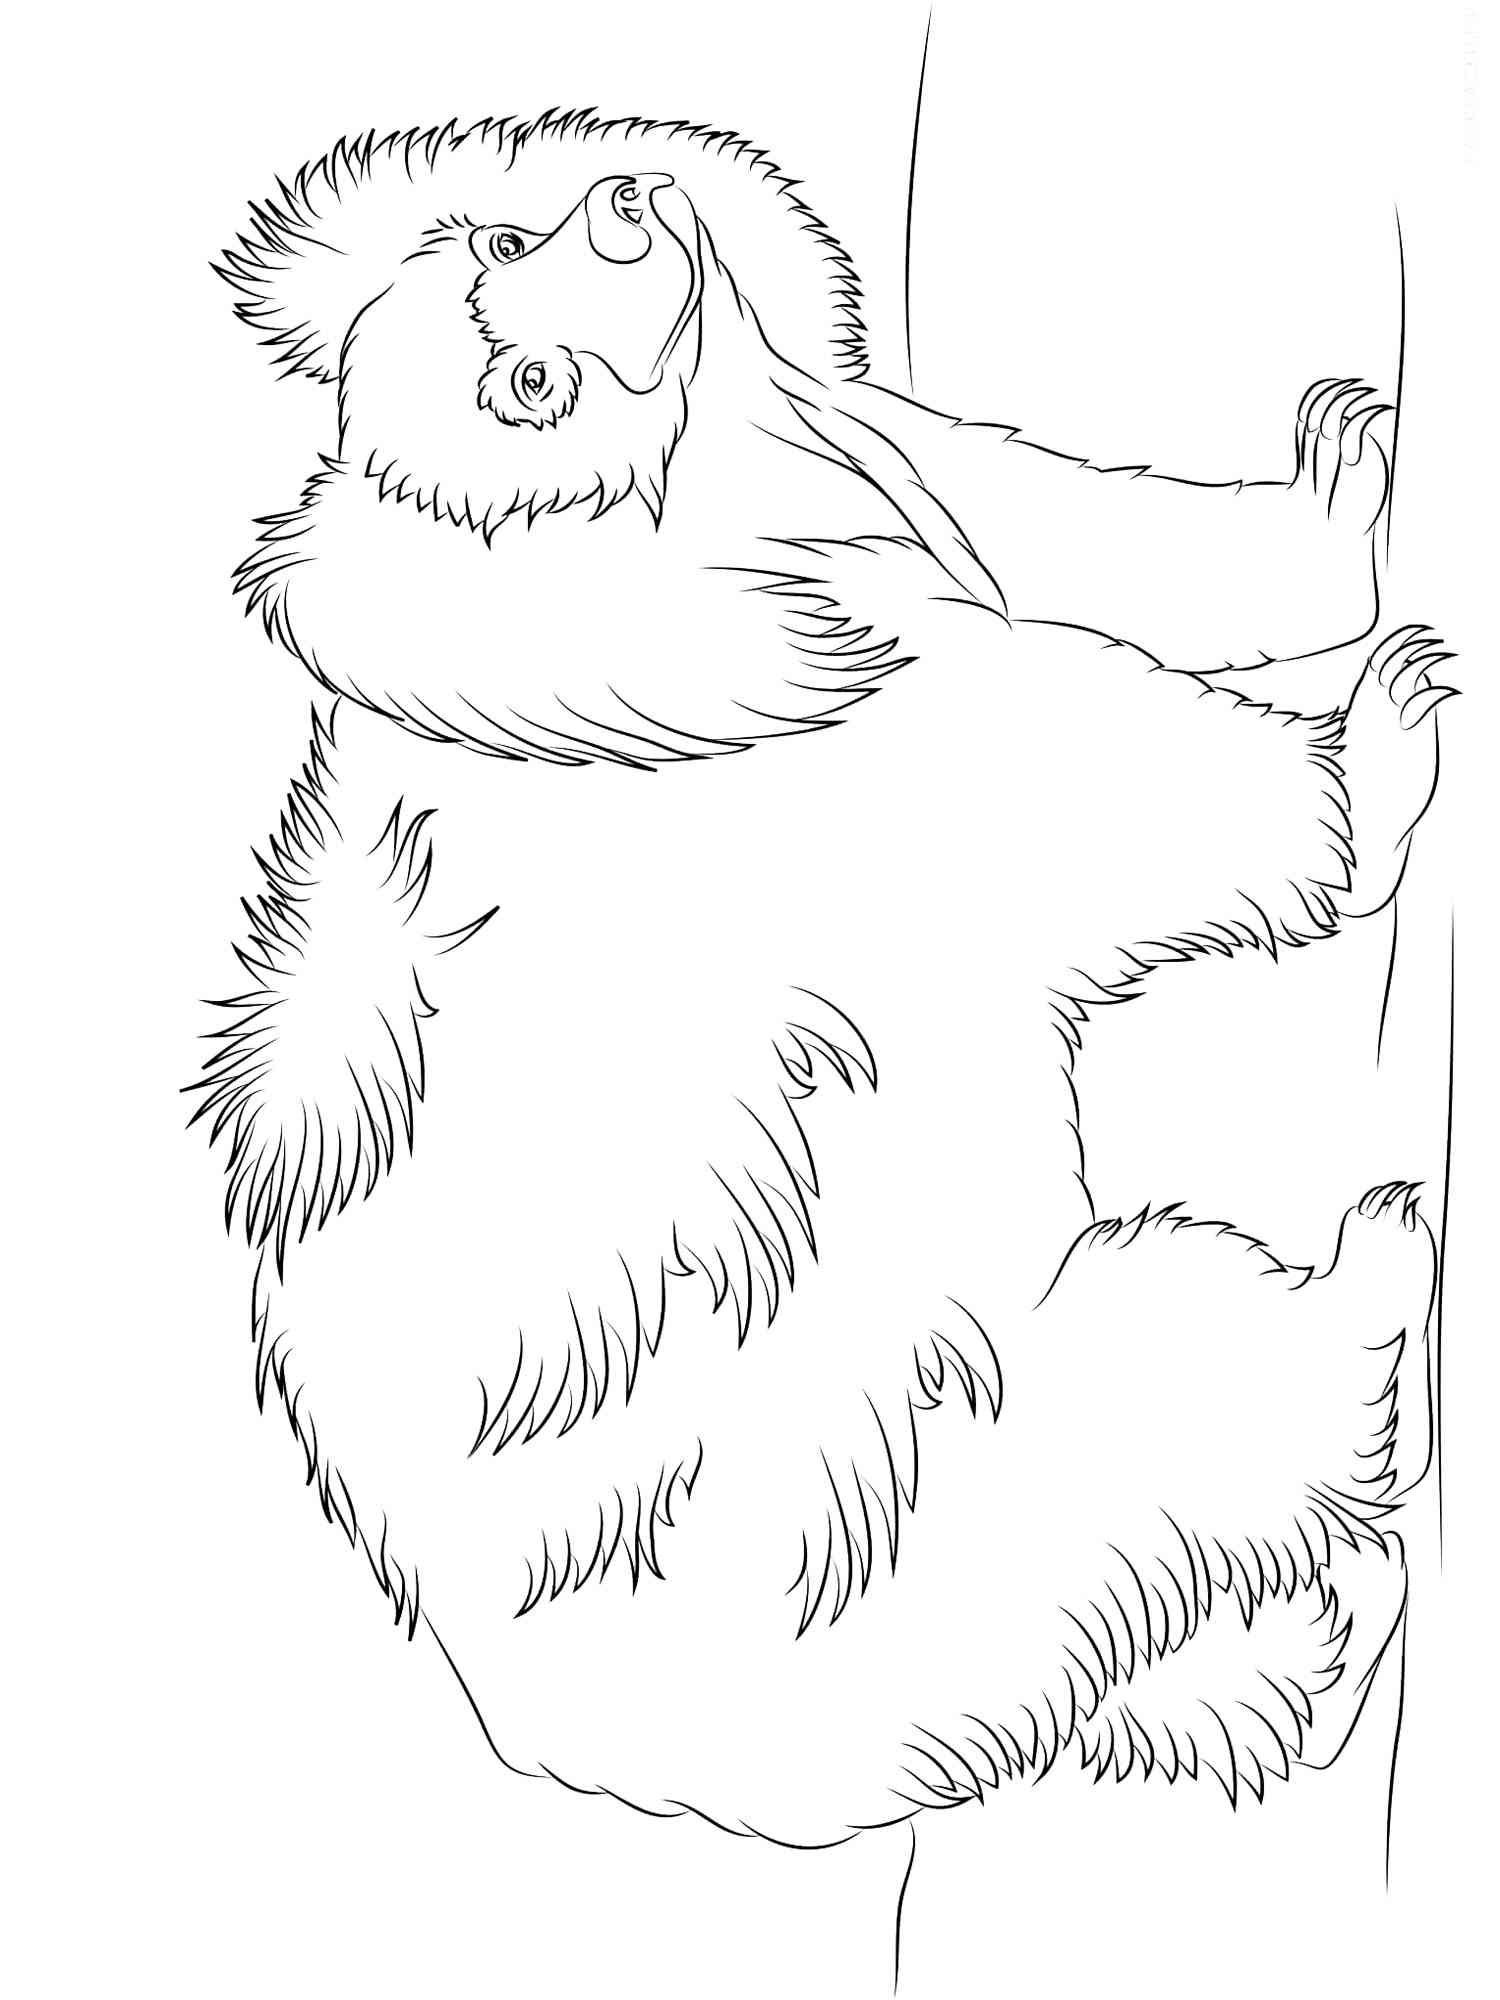 How To Draw Sloth Bear, Step by step - YouTube